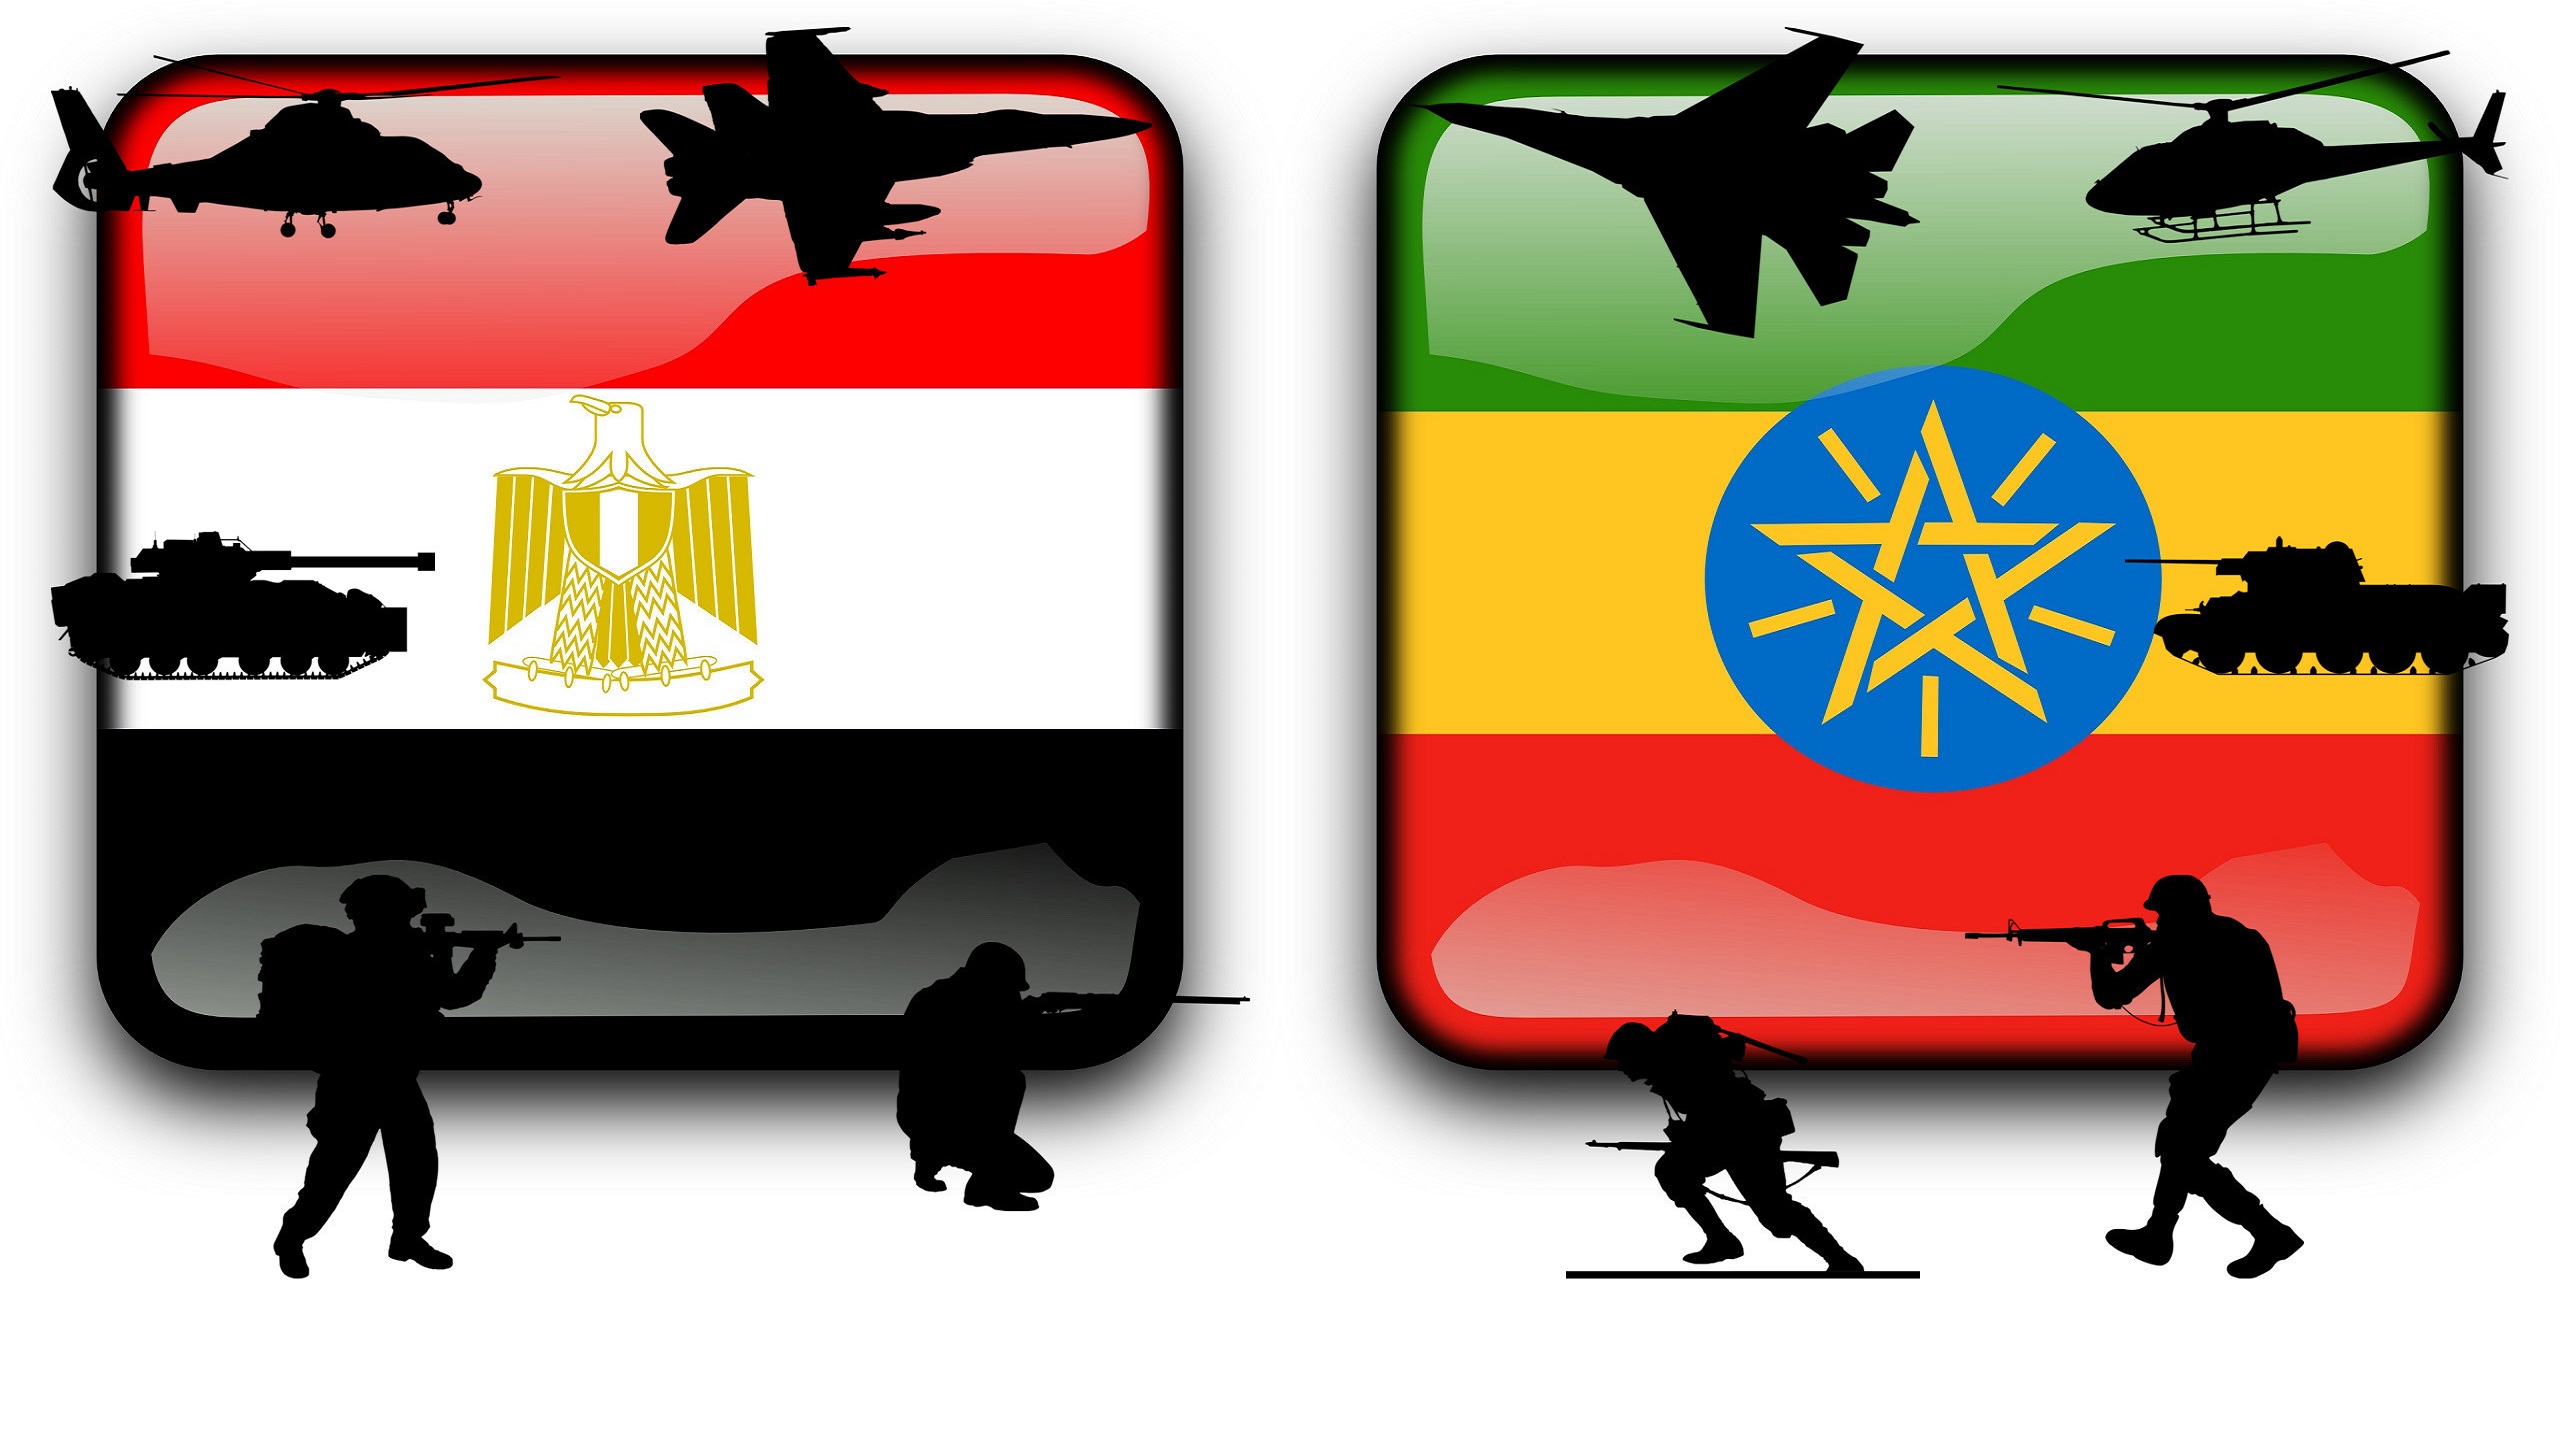 How Do Egypt, Ethiopia Stack up, Militarily? (VIDEO REPORT)